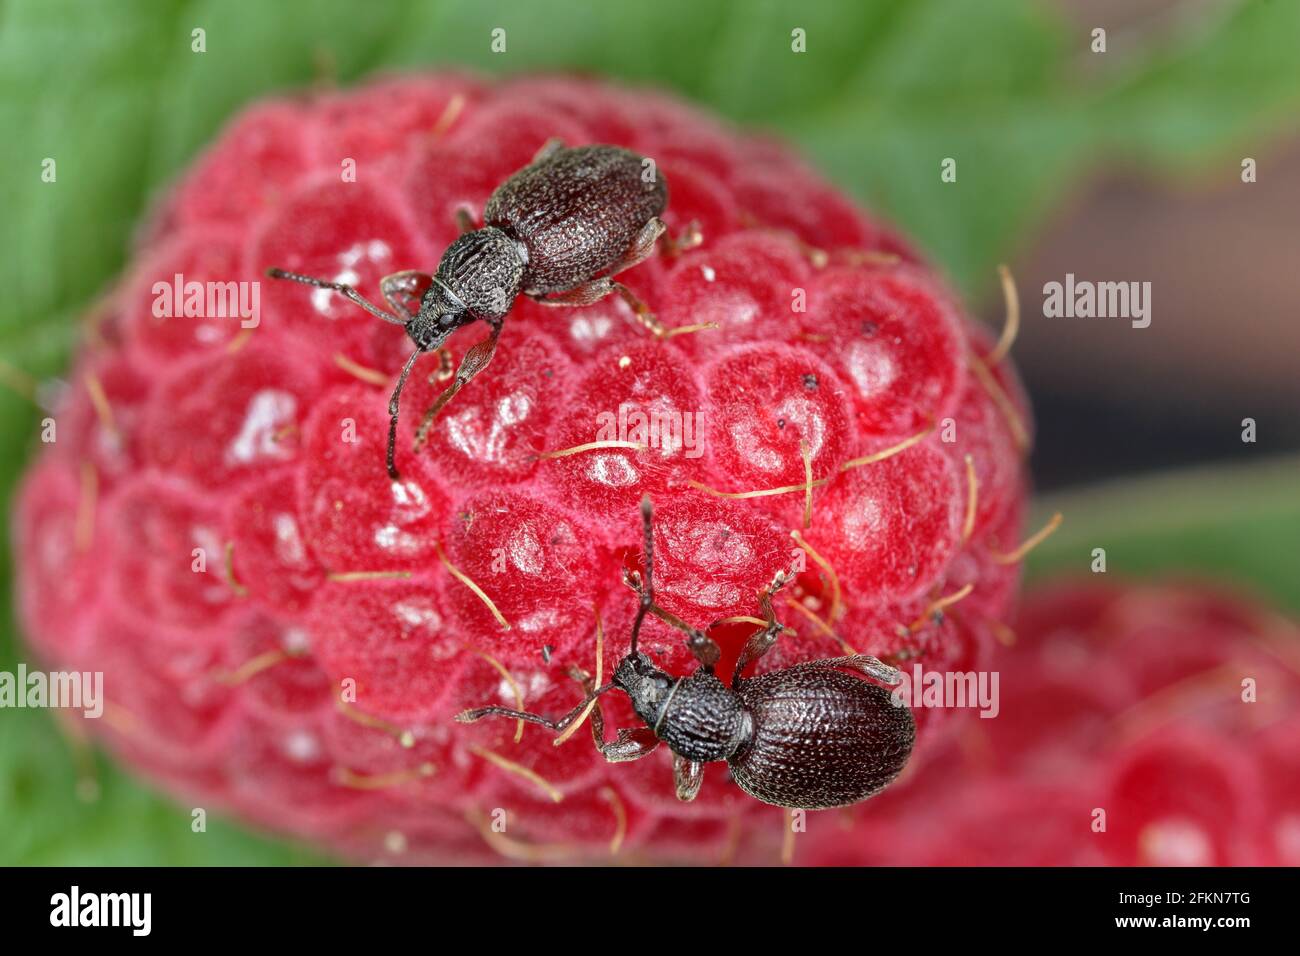 Strawberry root weevil - Otiorhynchus ovatus (latin name) in the raspberry fruit.  It is a species of weevils in the family Curculionidae. Stock Photo